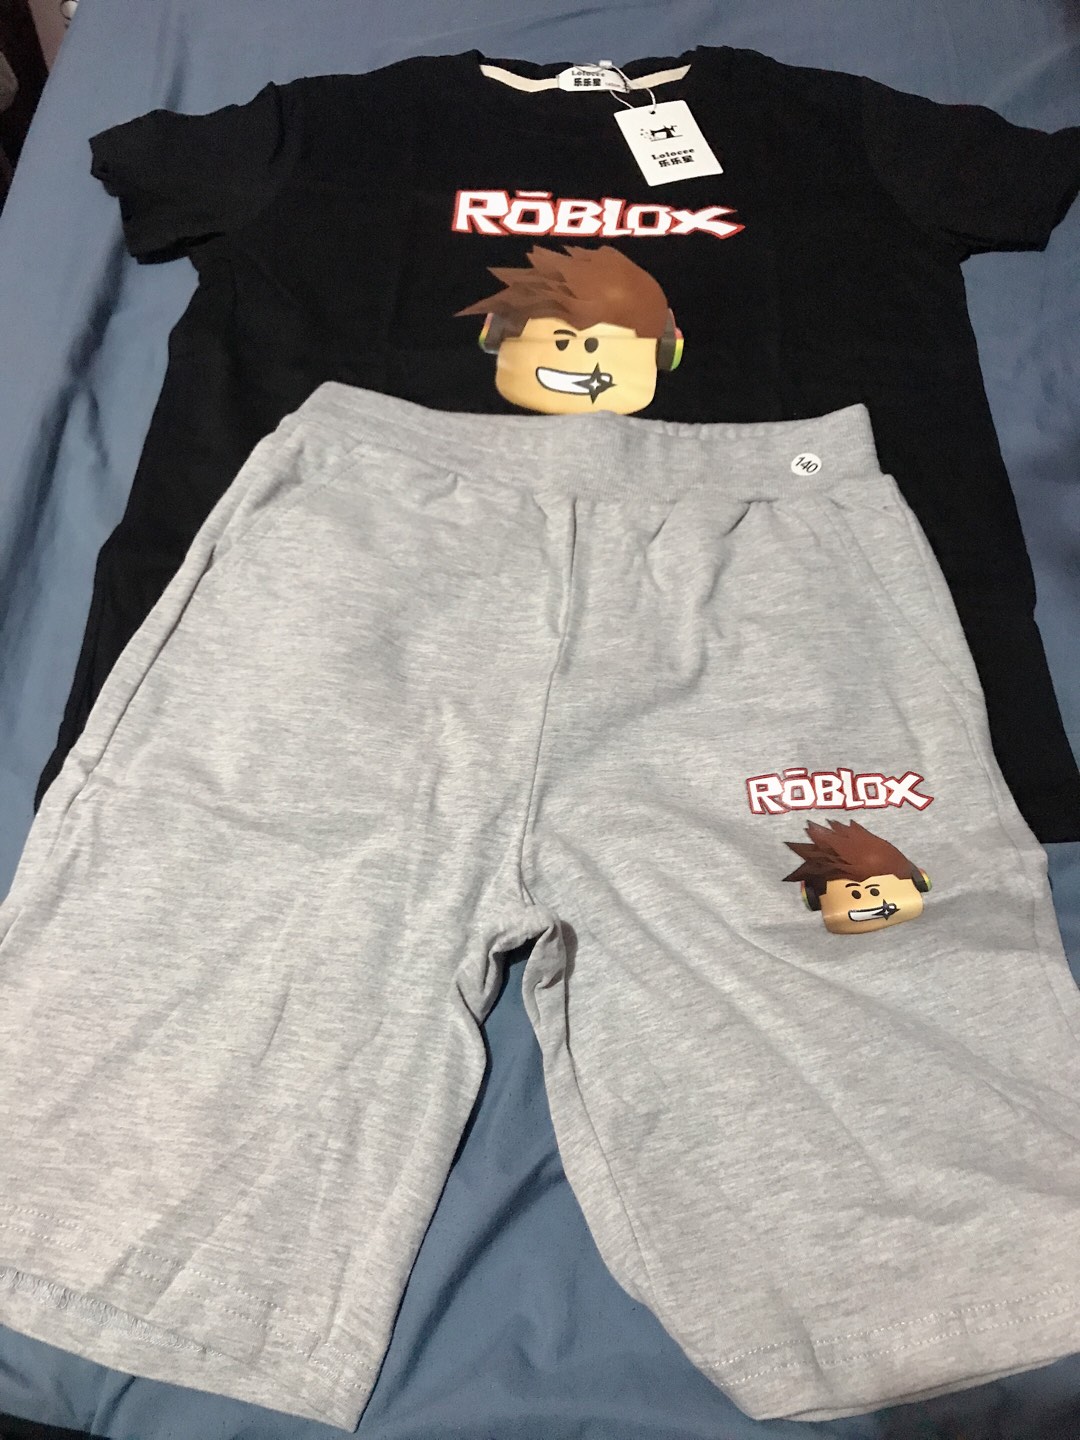 Kids Fashion Suit Roblox Clothing Boys T Shirt Pants Sets Boy Costume 2pc Set Shopee Philippines - roblox kids clothing the best prices online in philippines